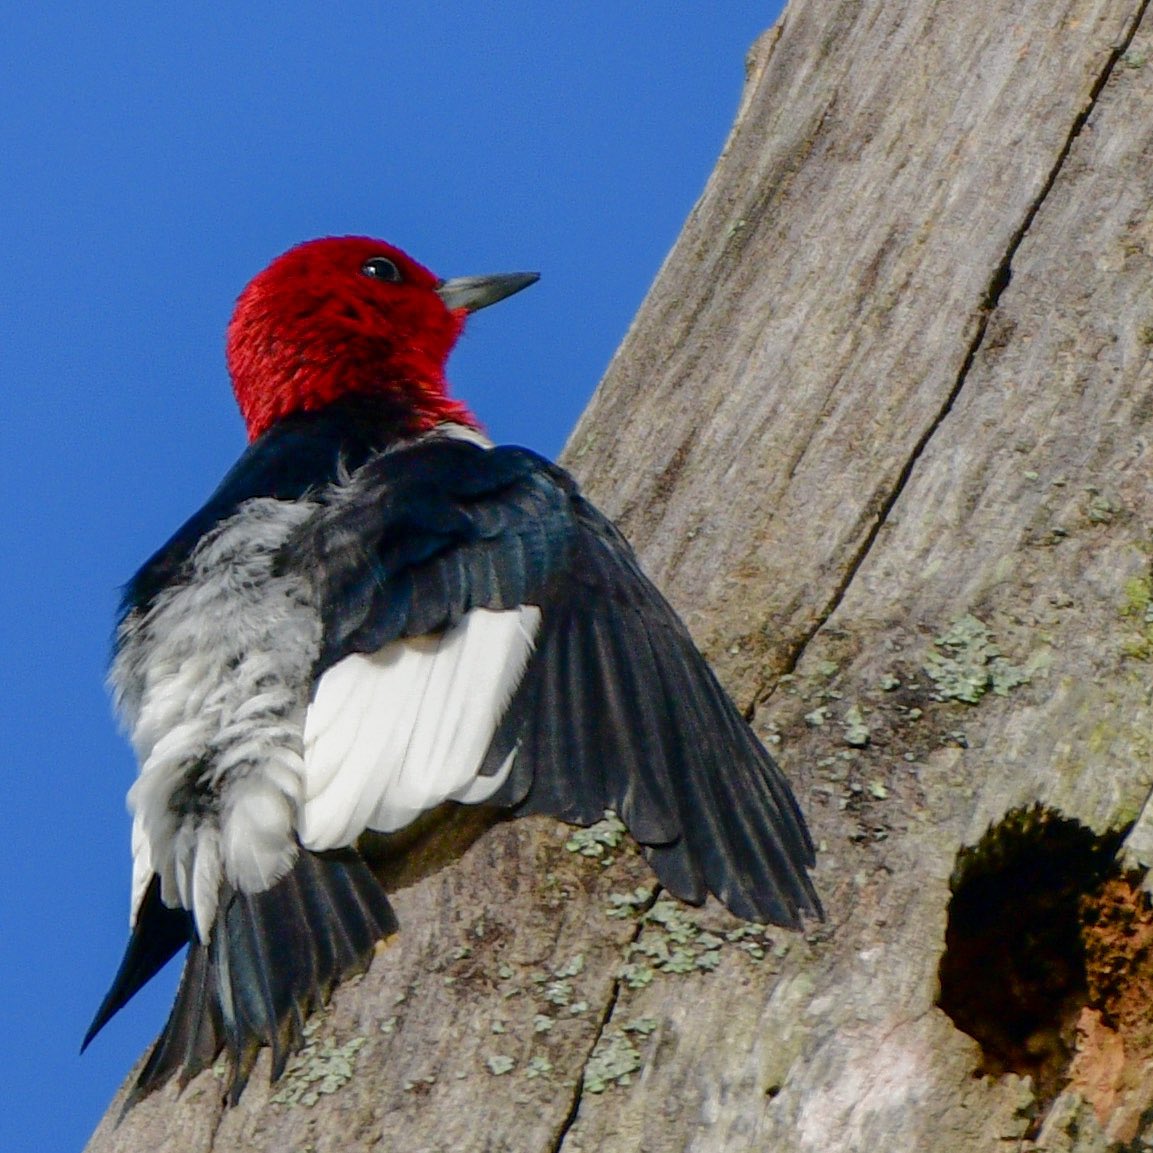 Red-headed Woodpecker drying off after a rainy night. Love how striking the red is against the clear blue sky. #WoodpeckerWednesday #Birds #Birding #BirdTwitter #BirdPhotography